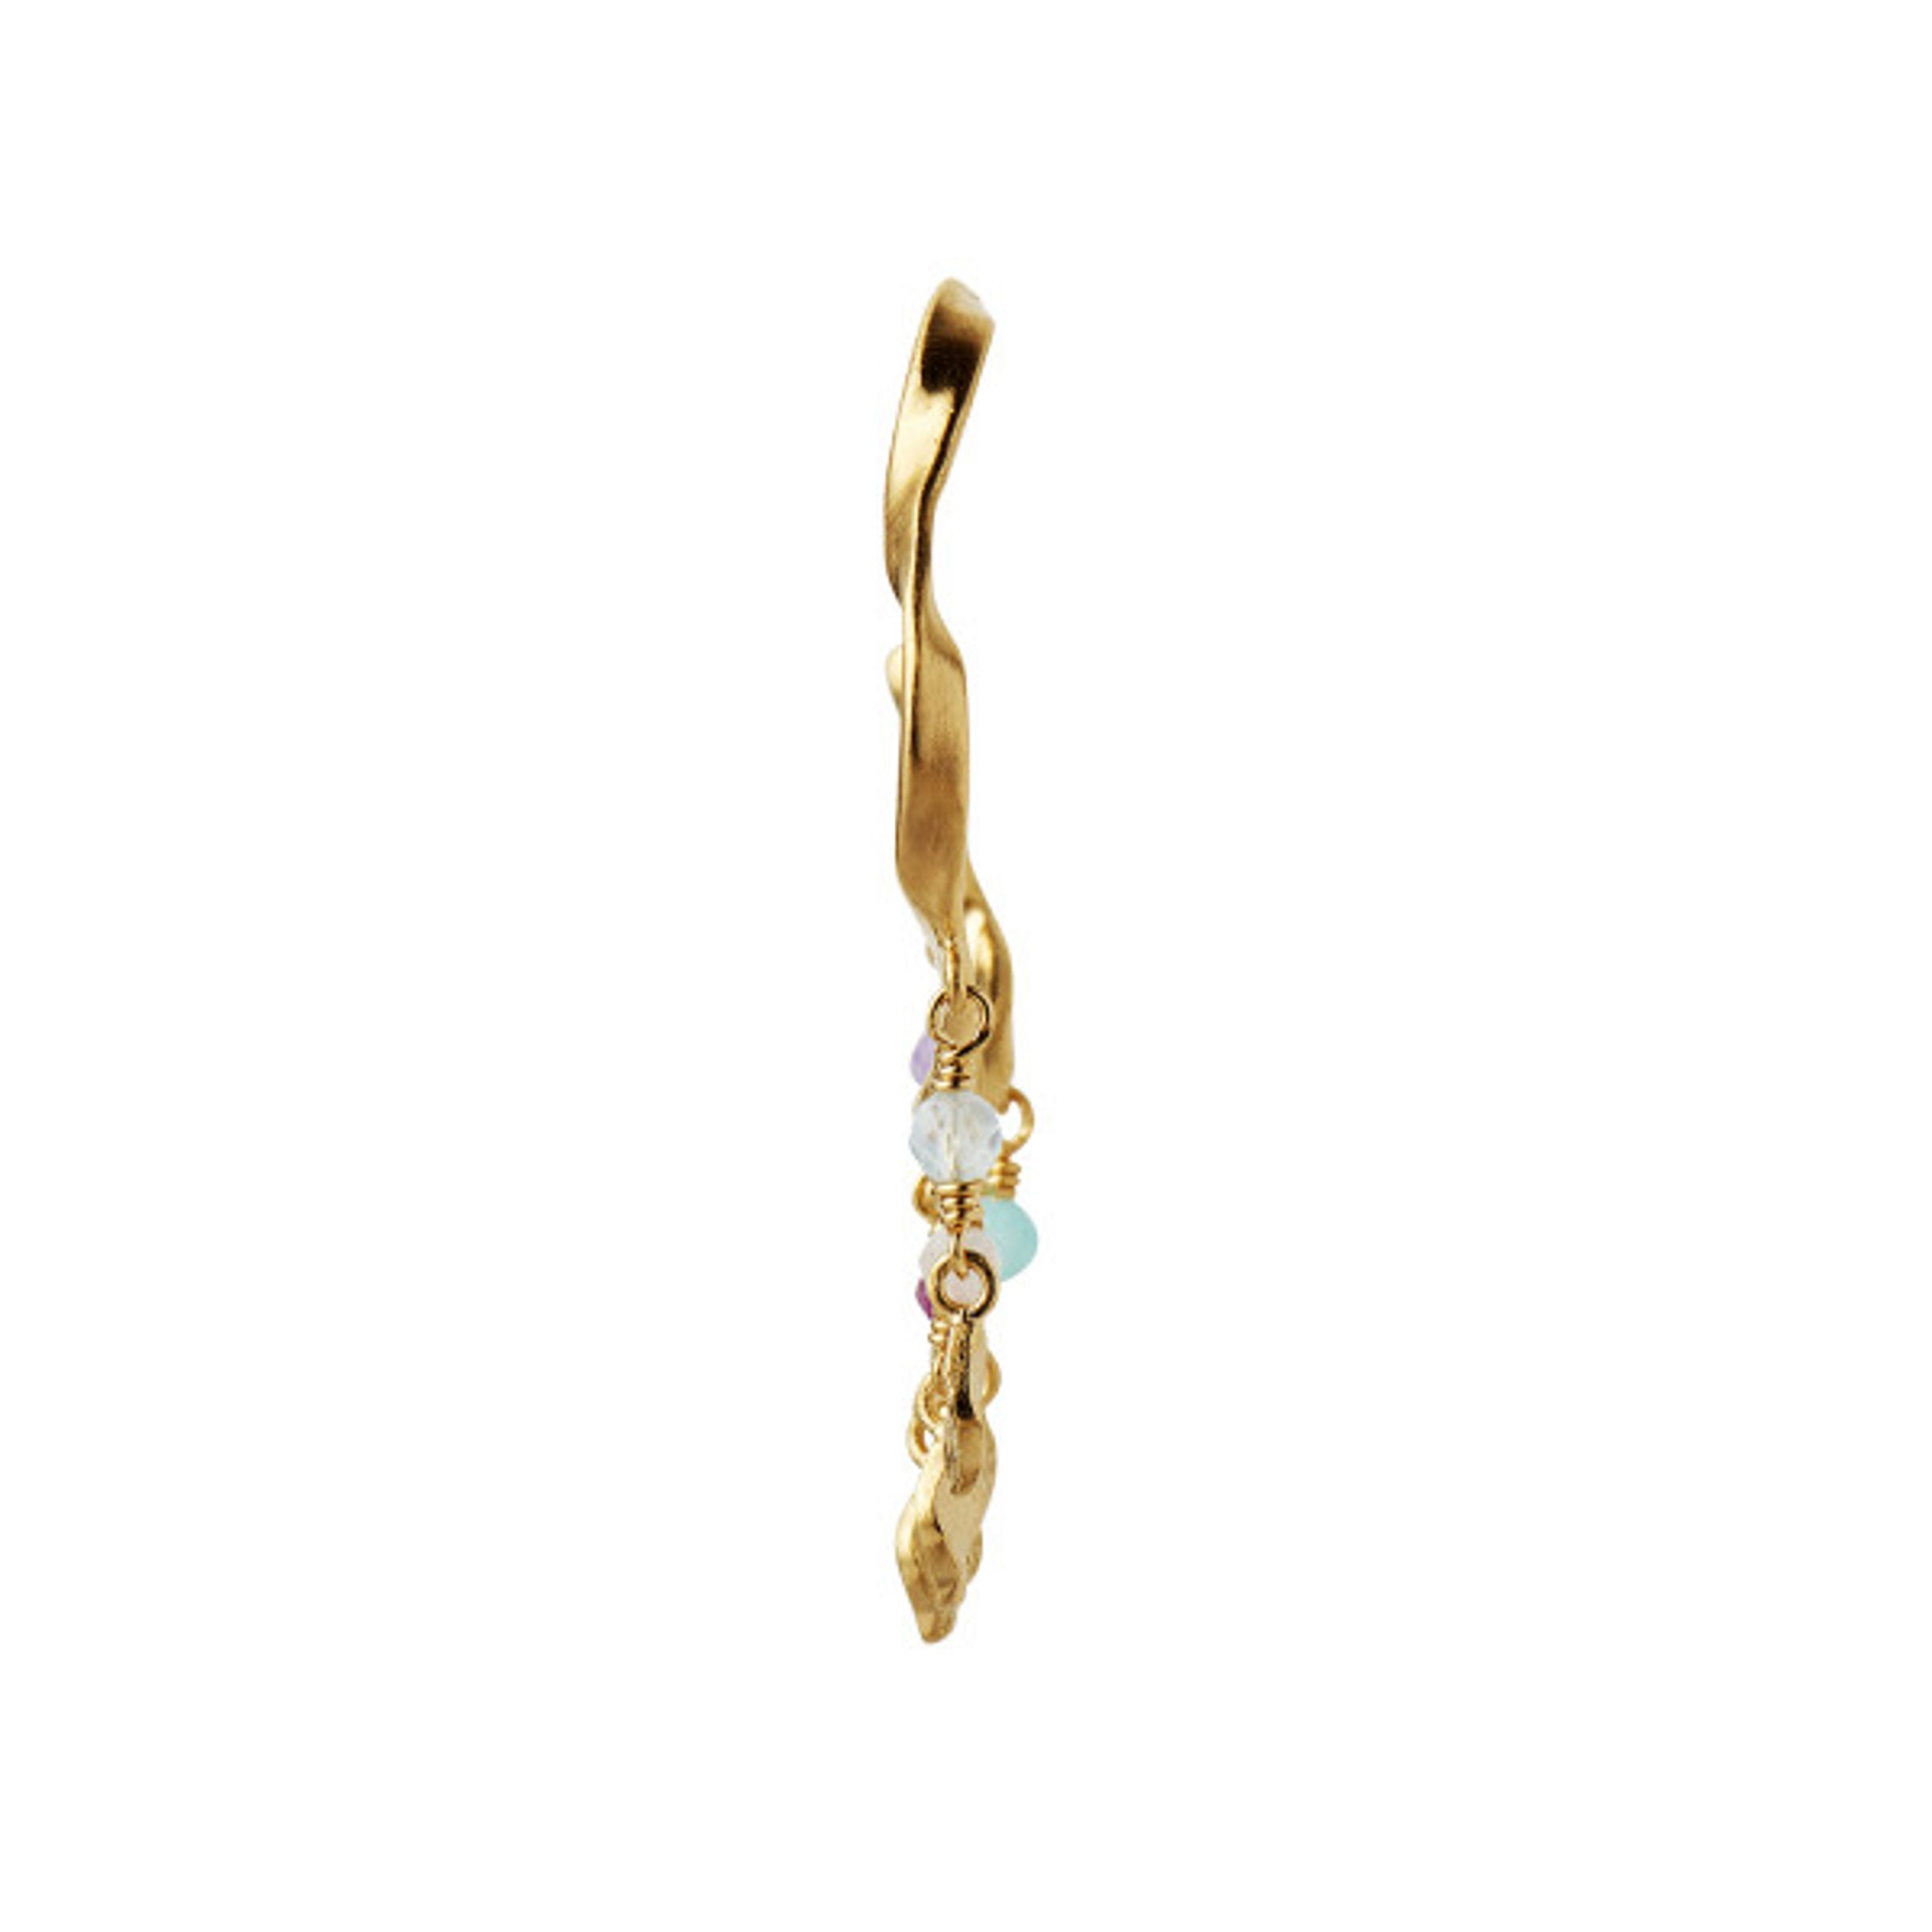 Stine A - Oorbel - Twisted Creol With Stones And ile De Lamour - Gold